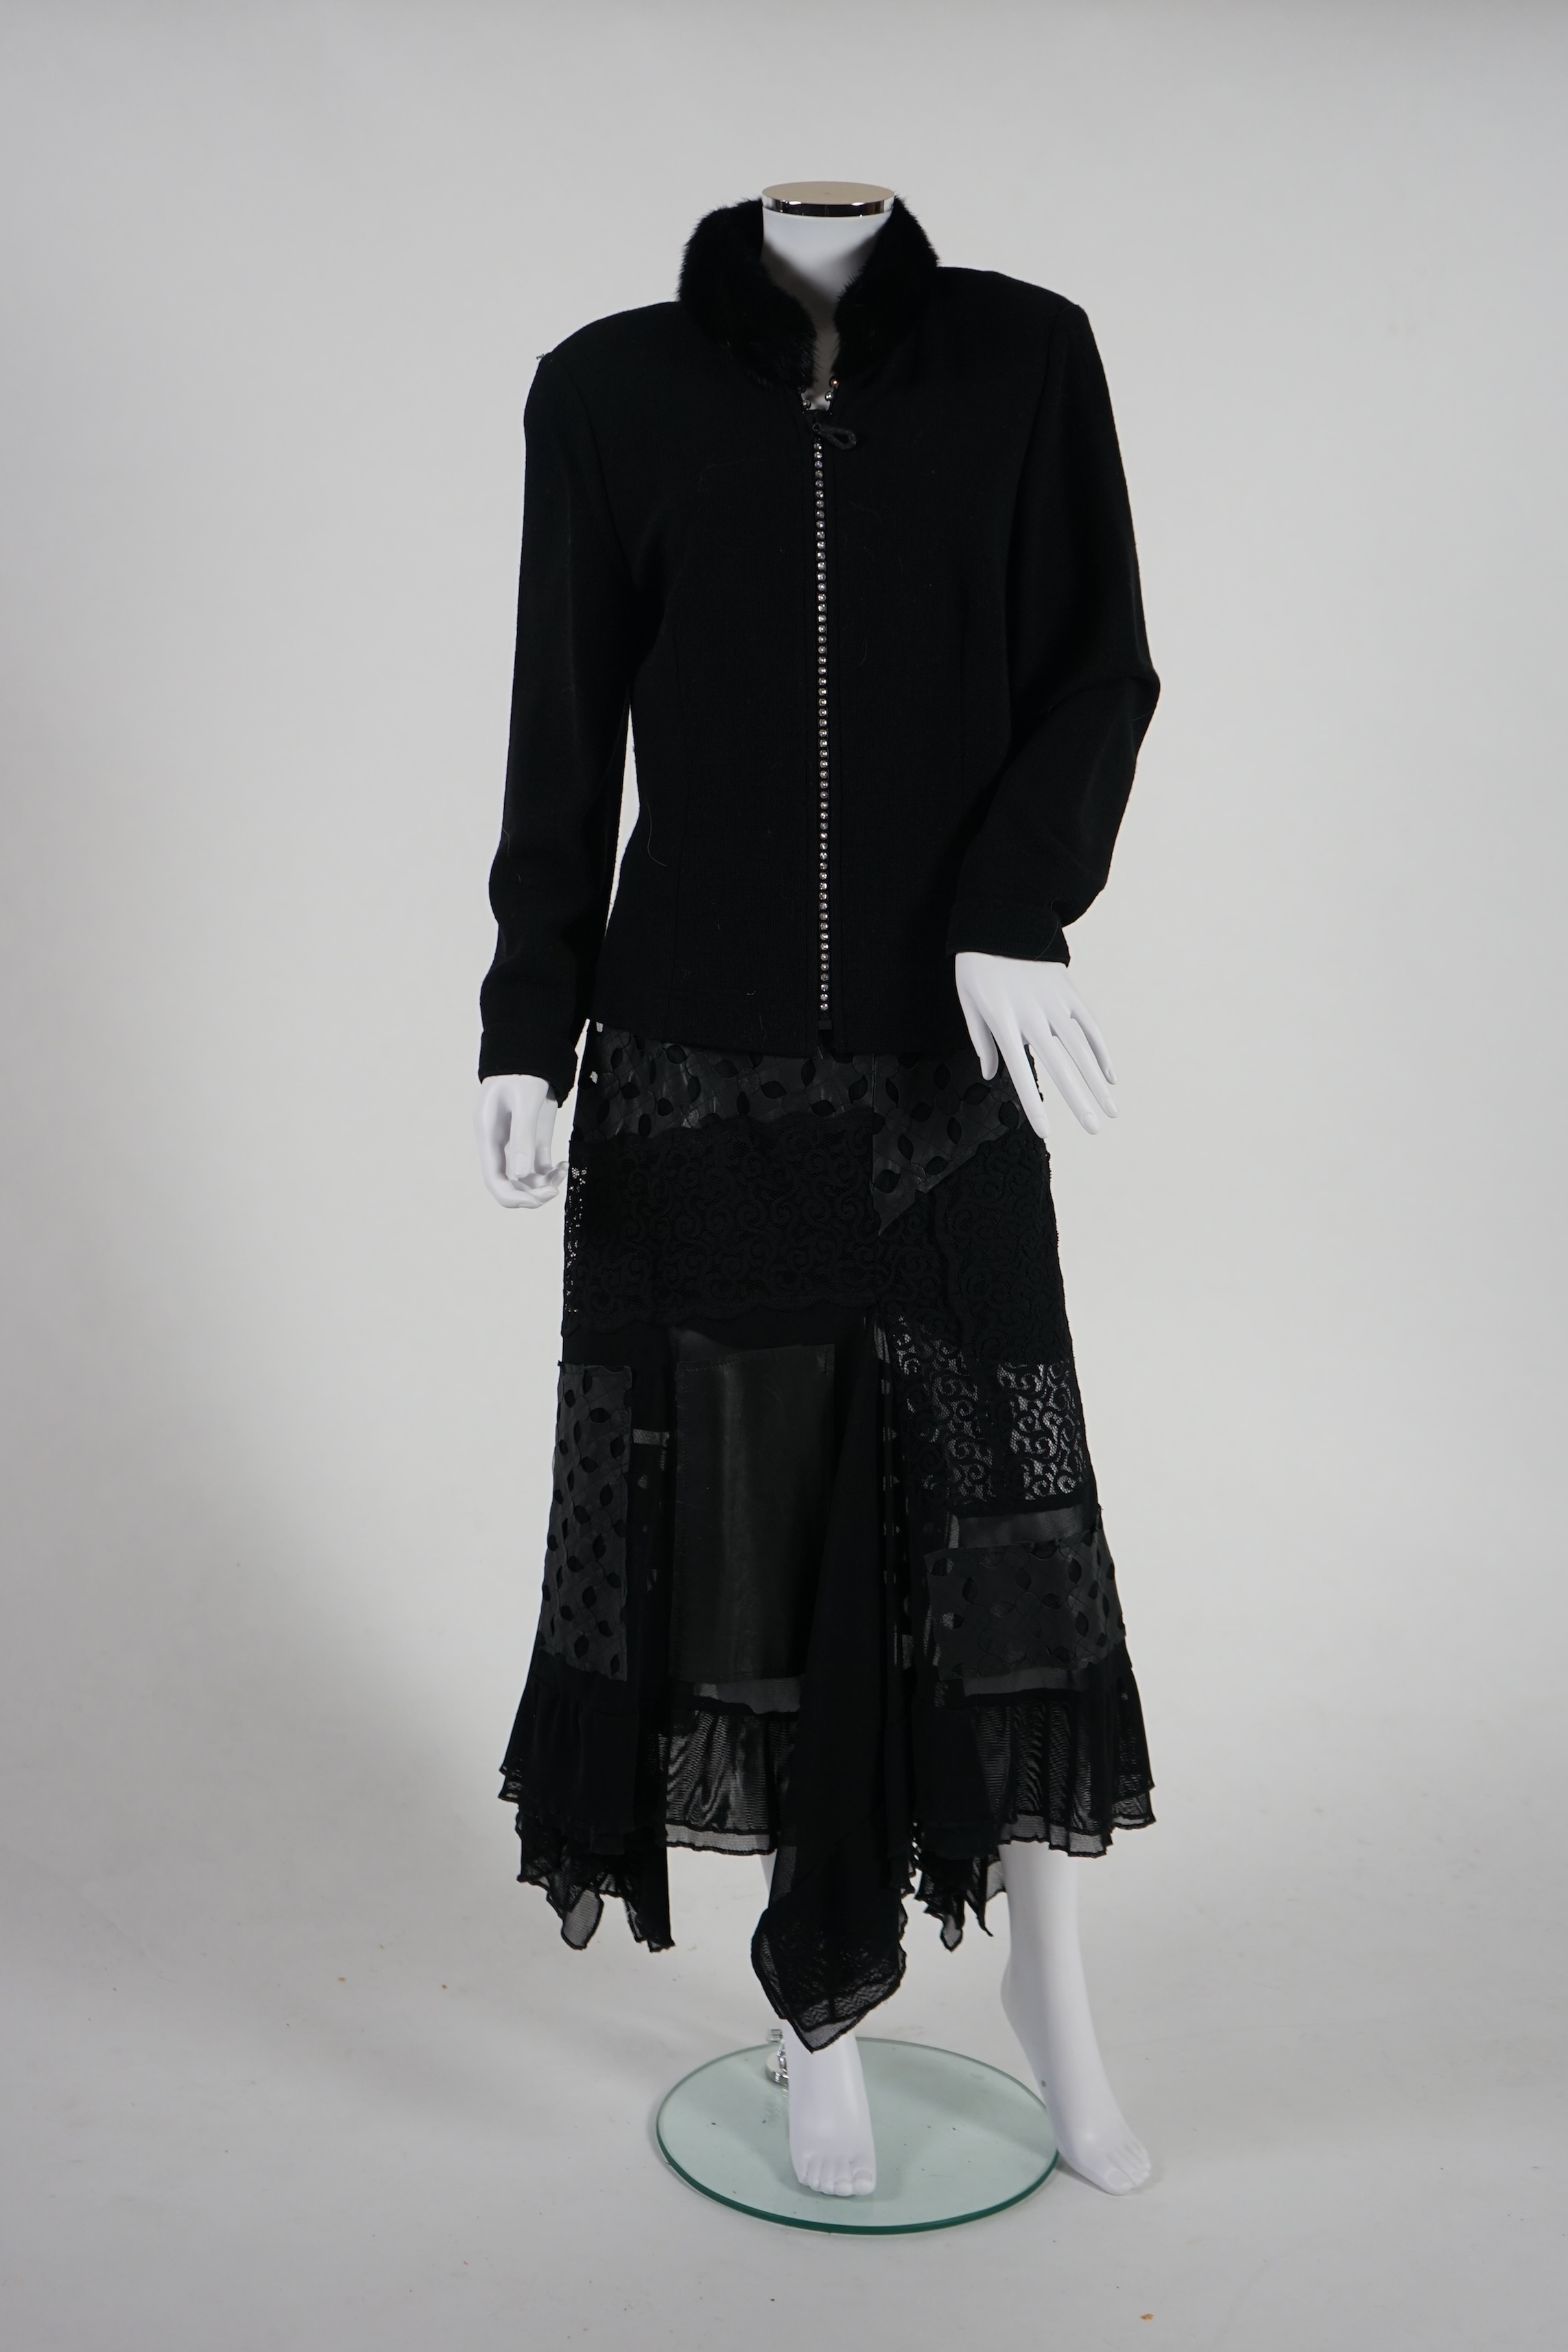 A Gloria Estelles black lady's knitted jacket with fur collar and diamonté detail and an Azur black leather and lace midi skirt. Size 16. Proceeds to Happy Paws Puppy Rescue